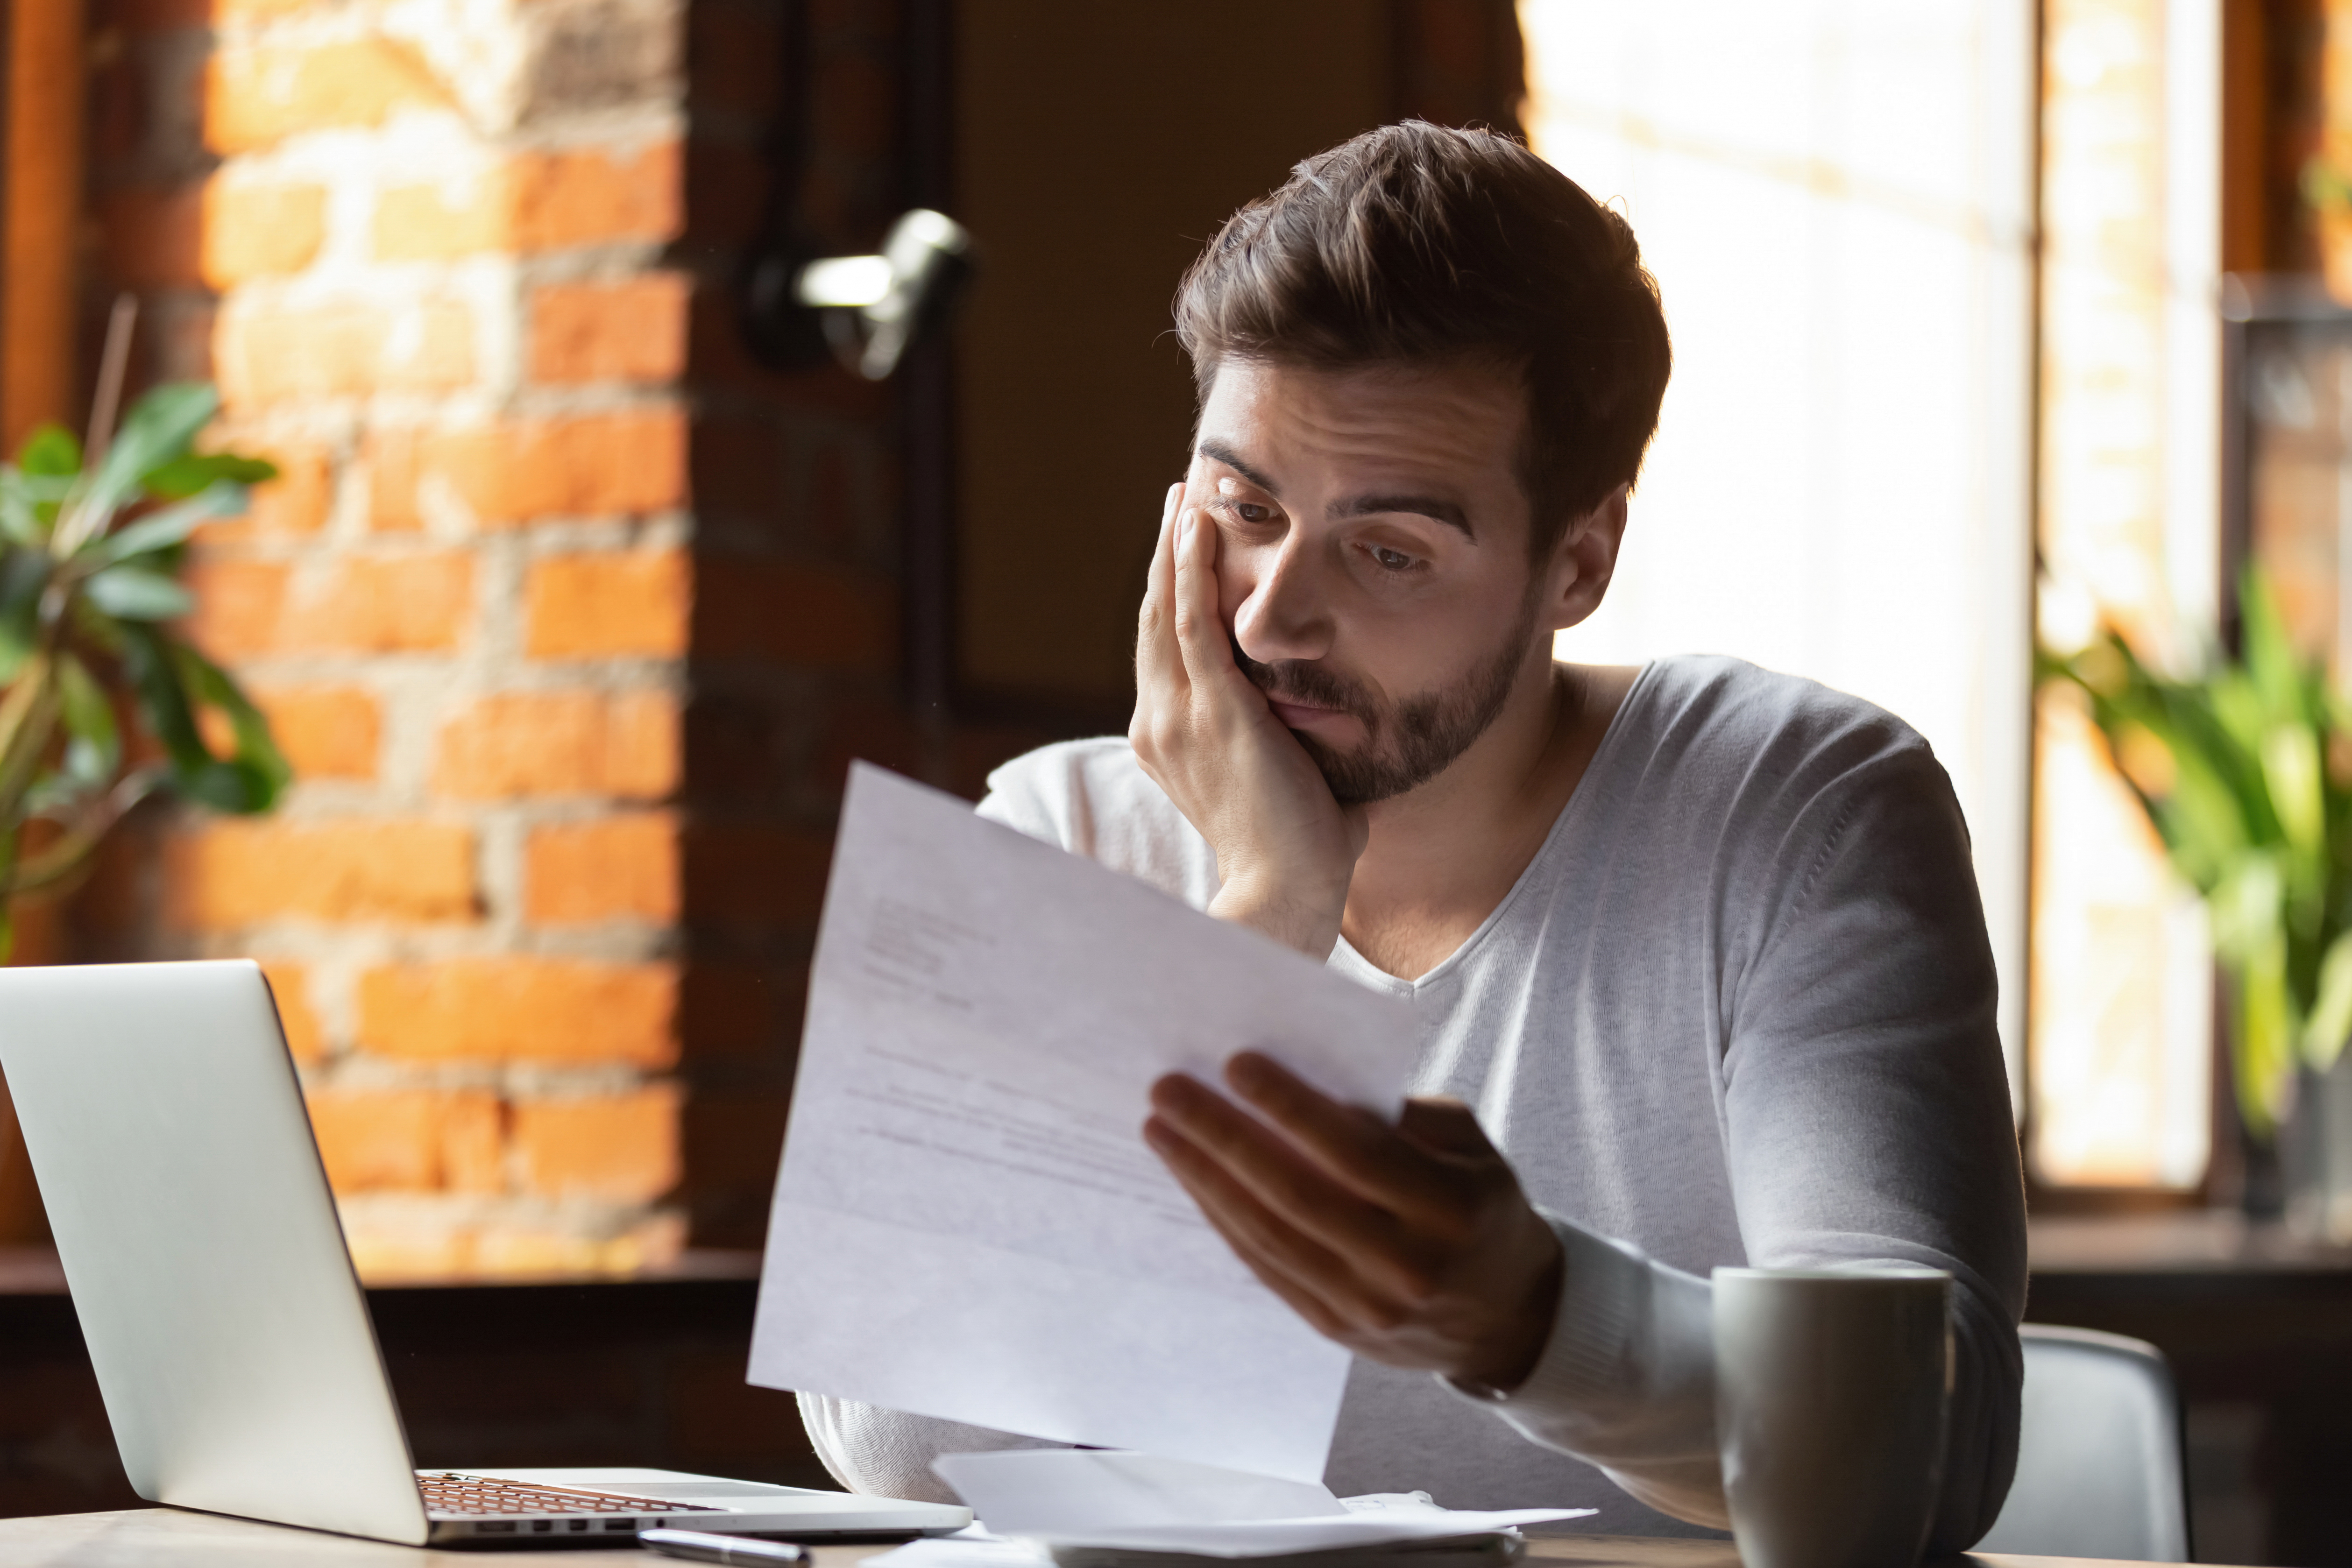 A confused and frustrated man reading some paper work | Source: Shutterstock